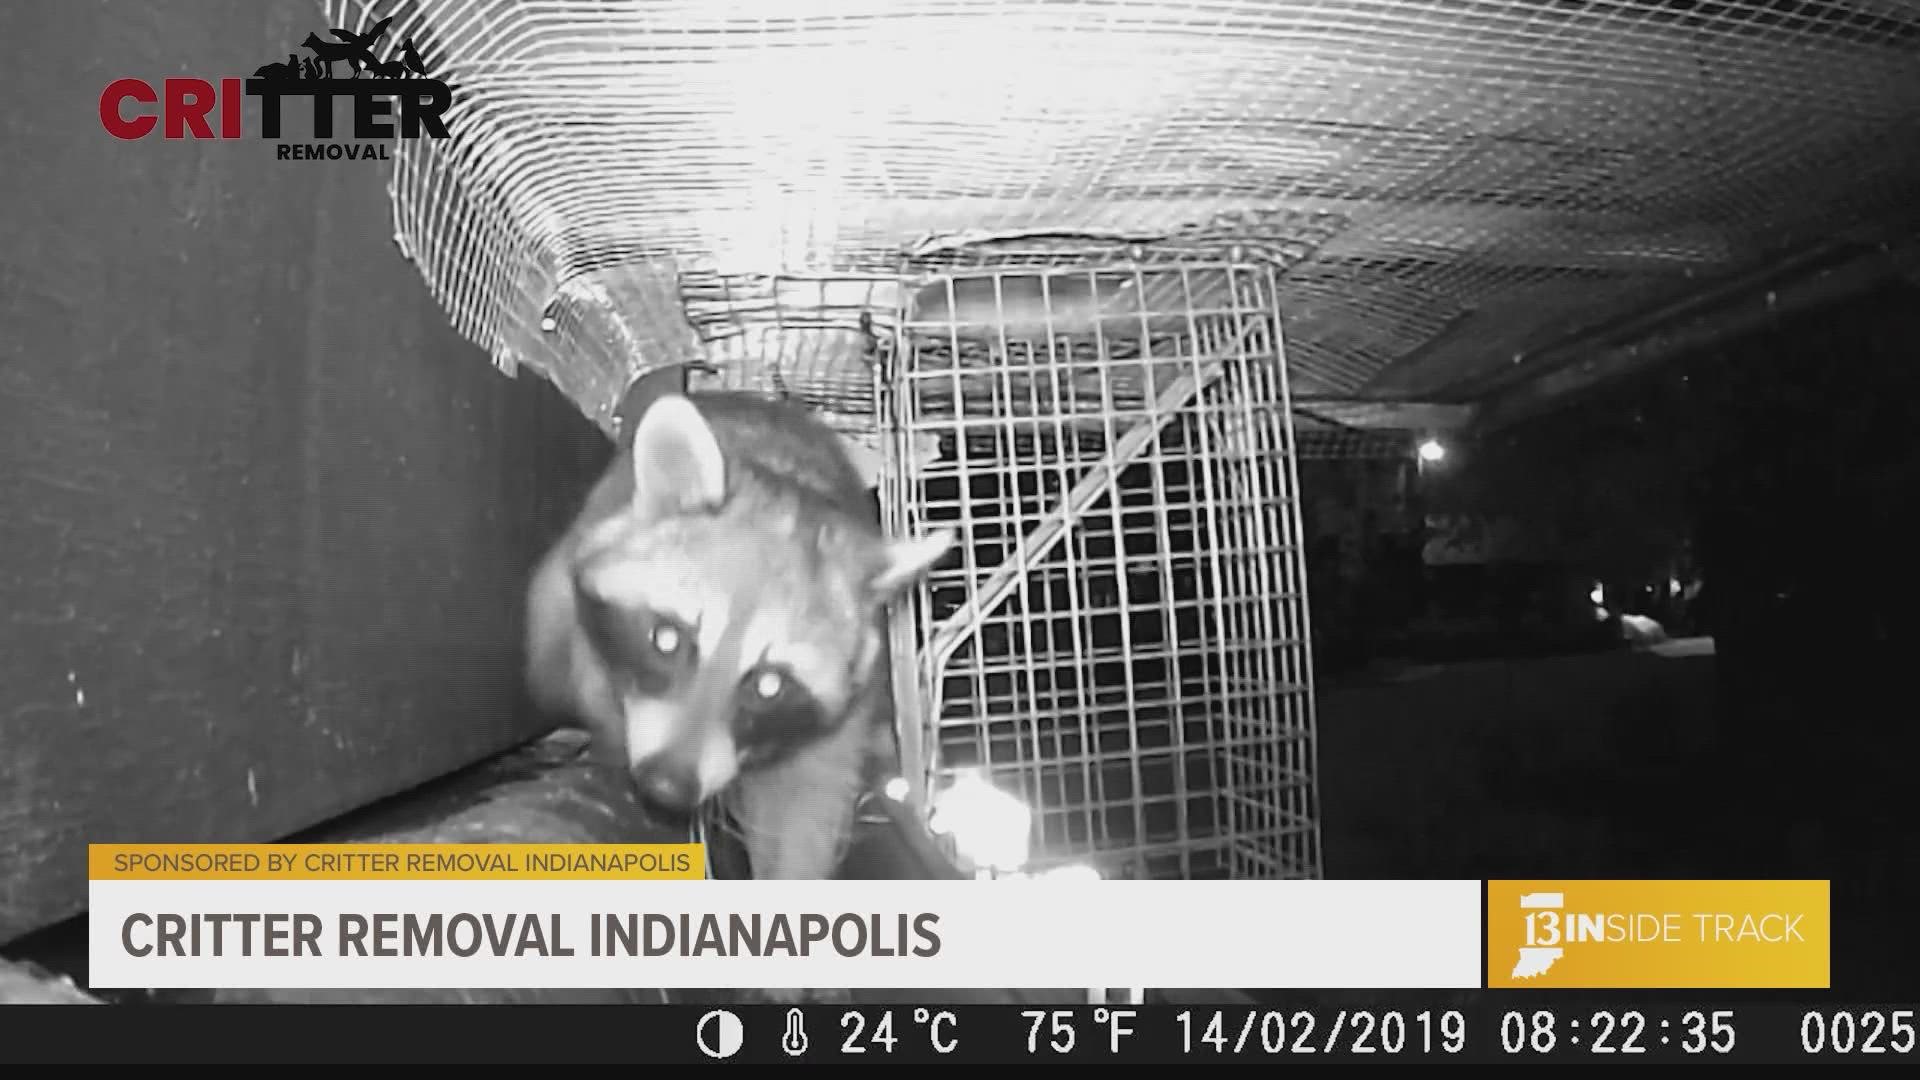 Critter Removal Indianapolis provides animal removal services, damage repair, as well as cleanup and pest control.